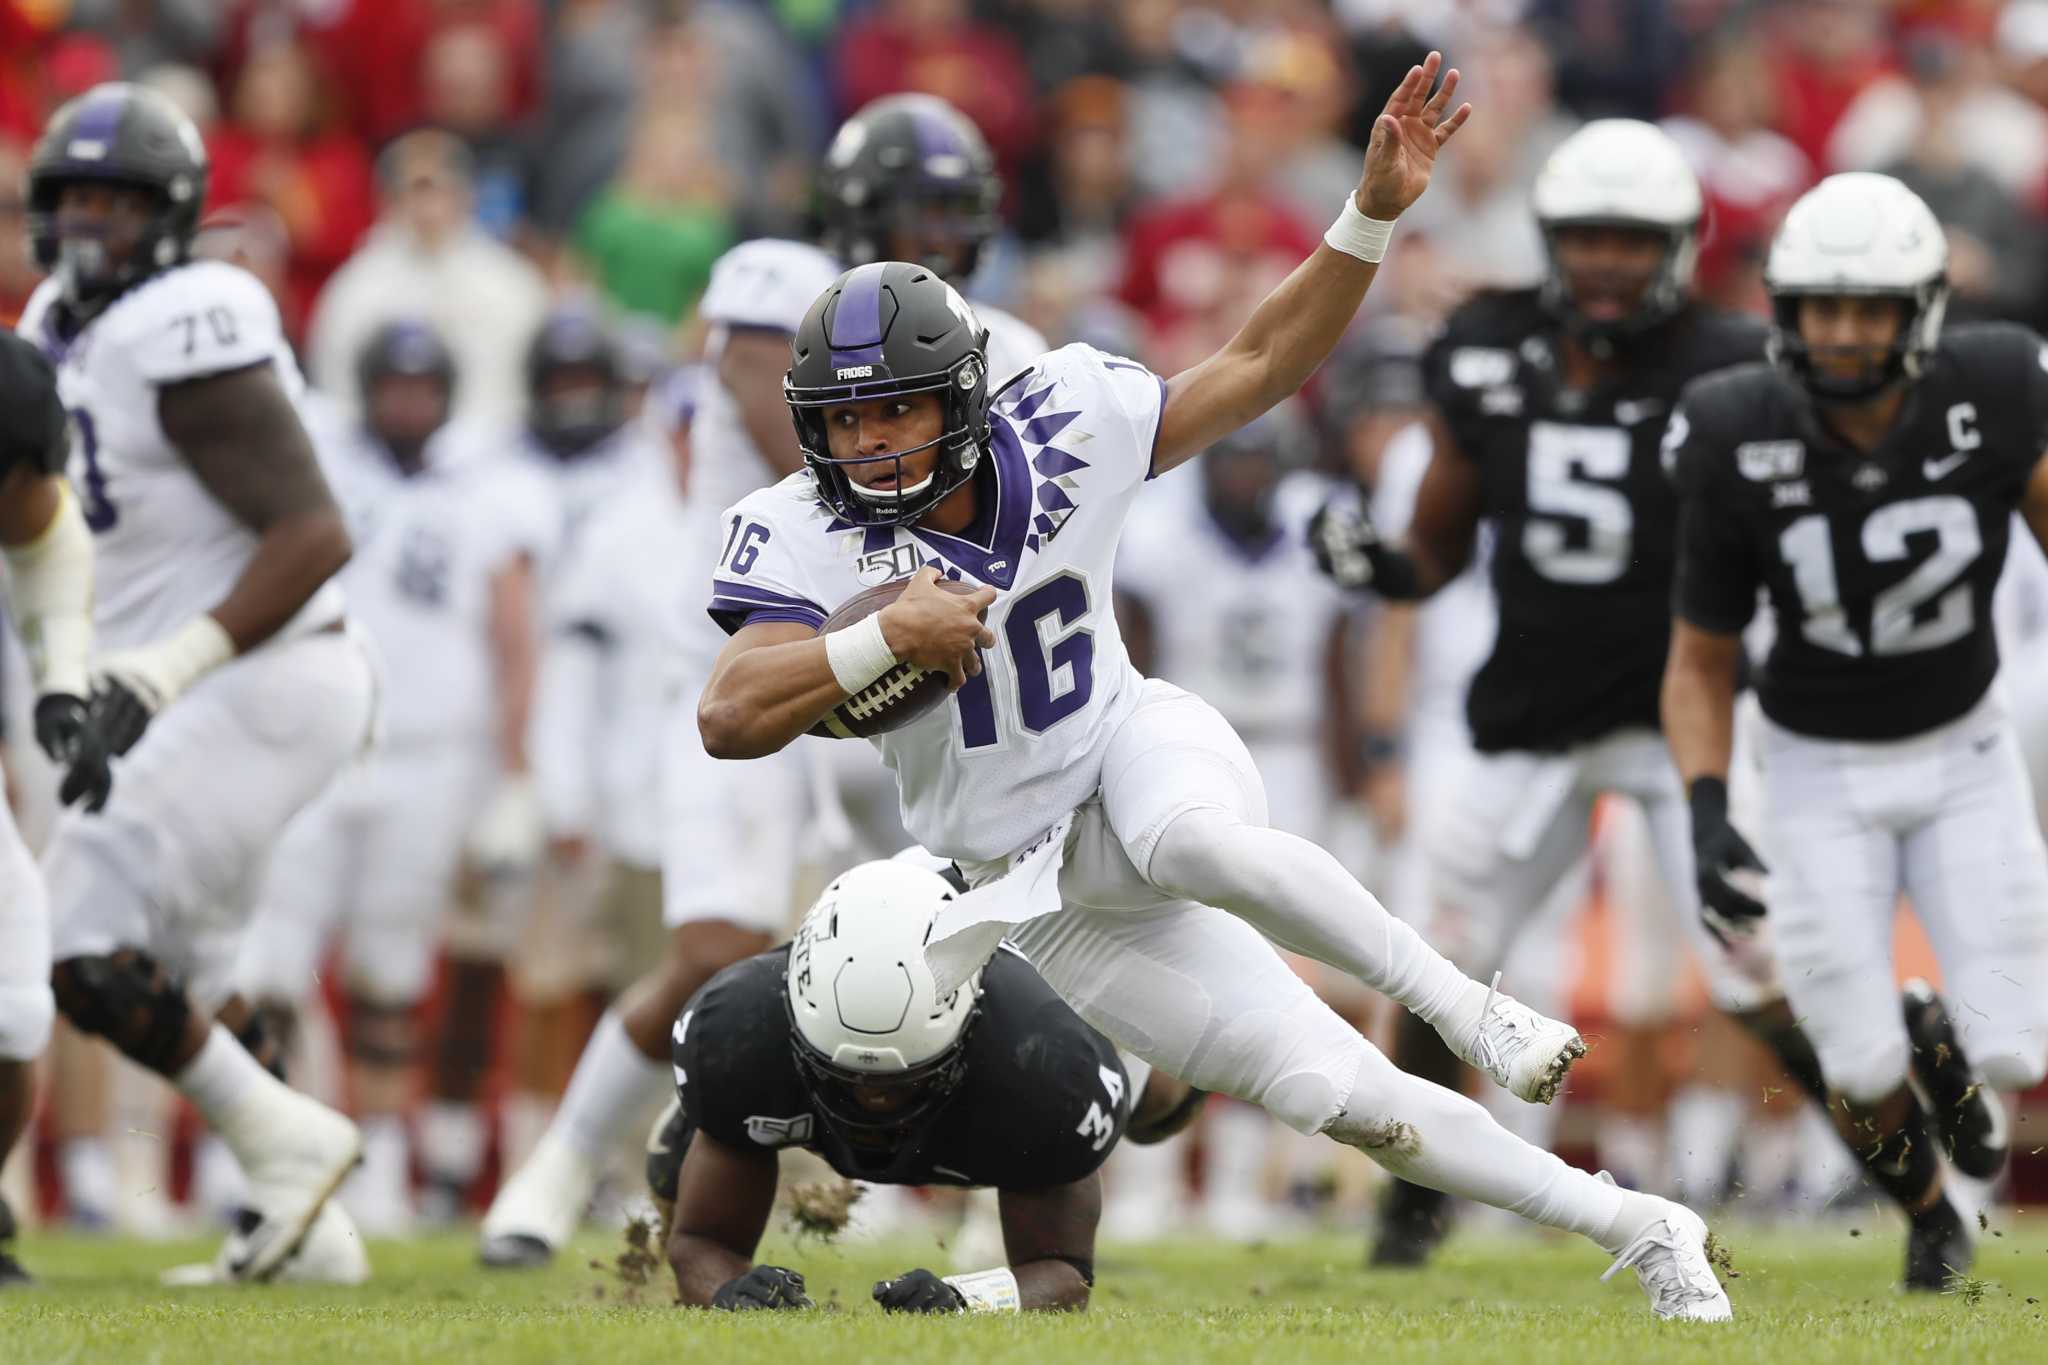 College football preview: TCU at Kansas State